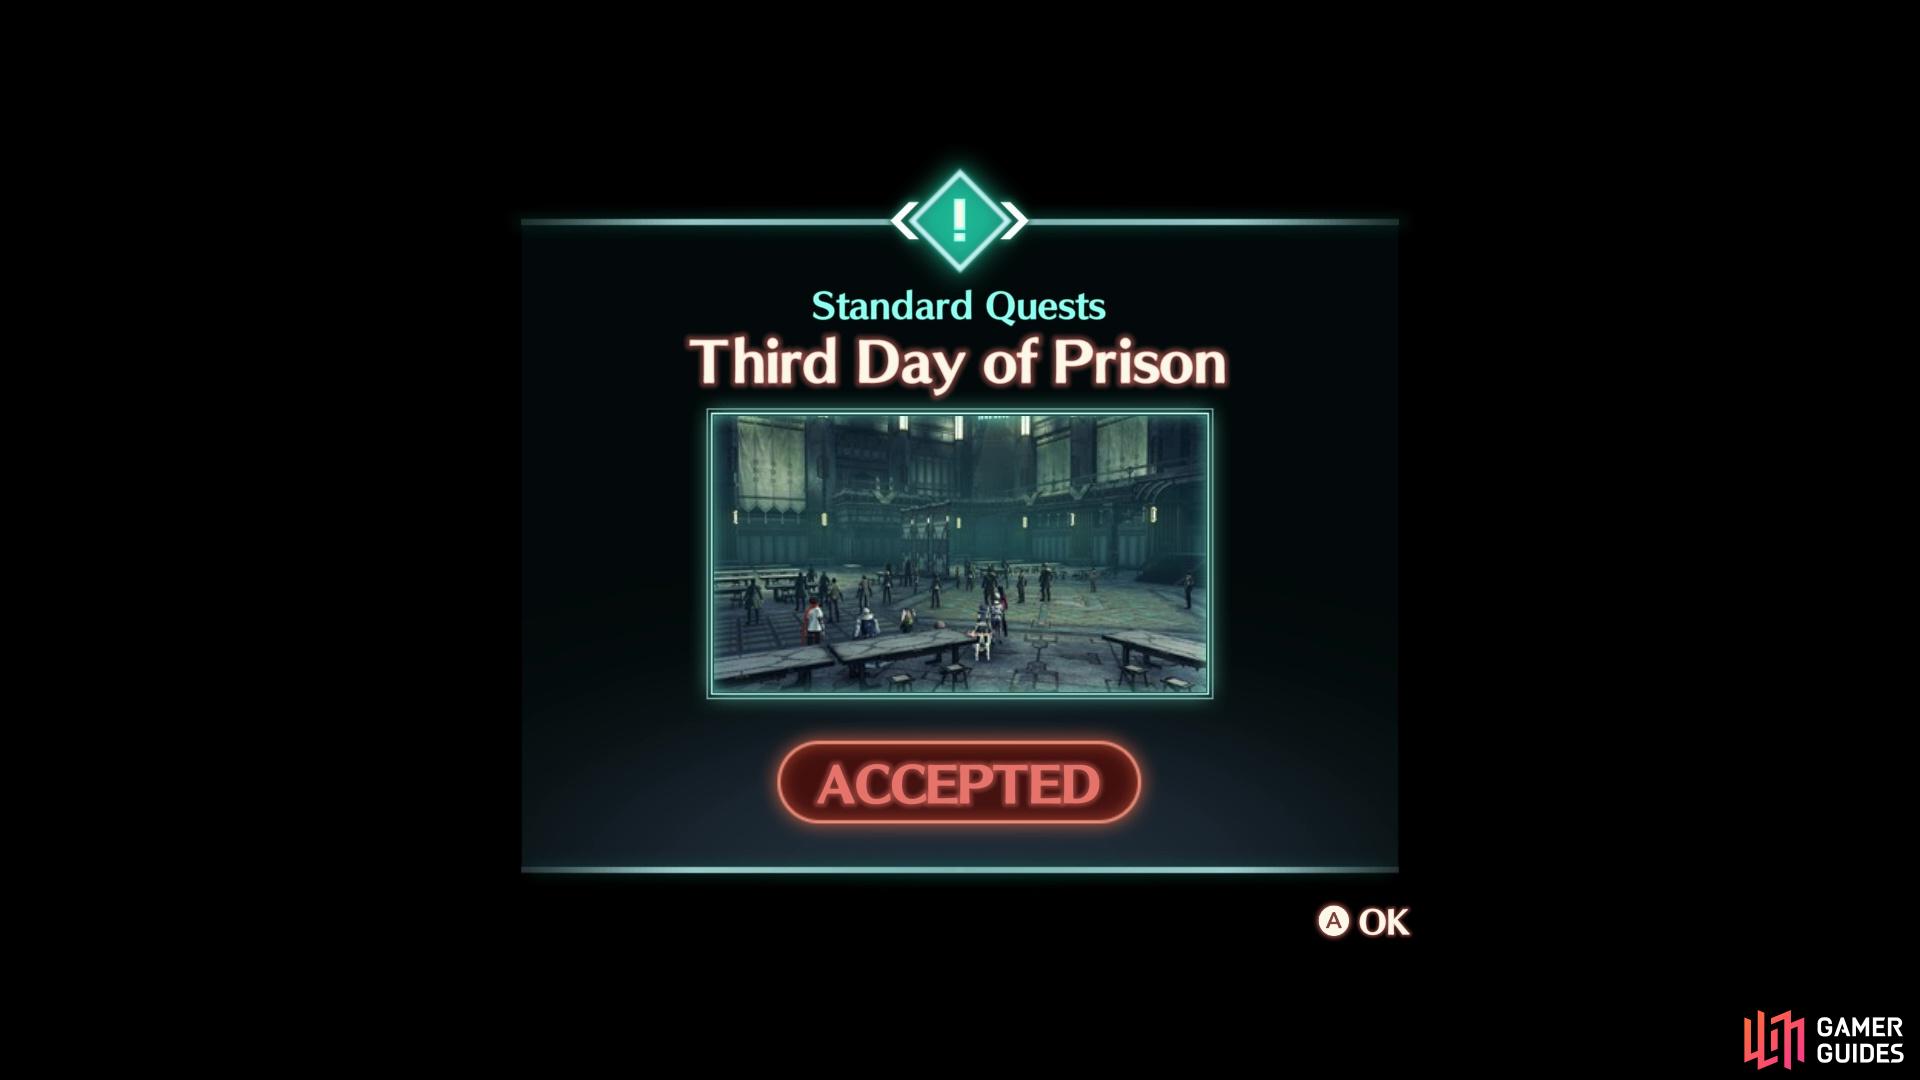 The Third Day of Prison Standard Quest.